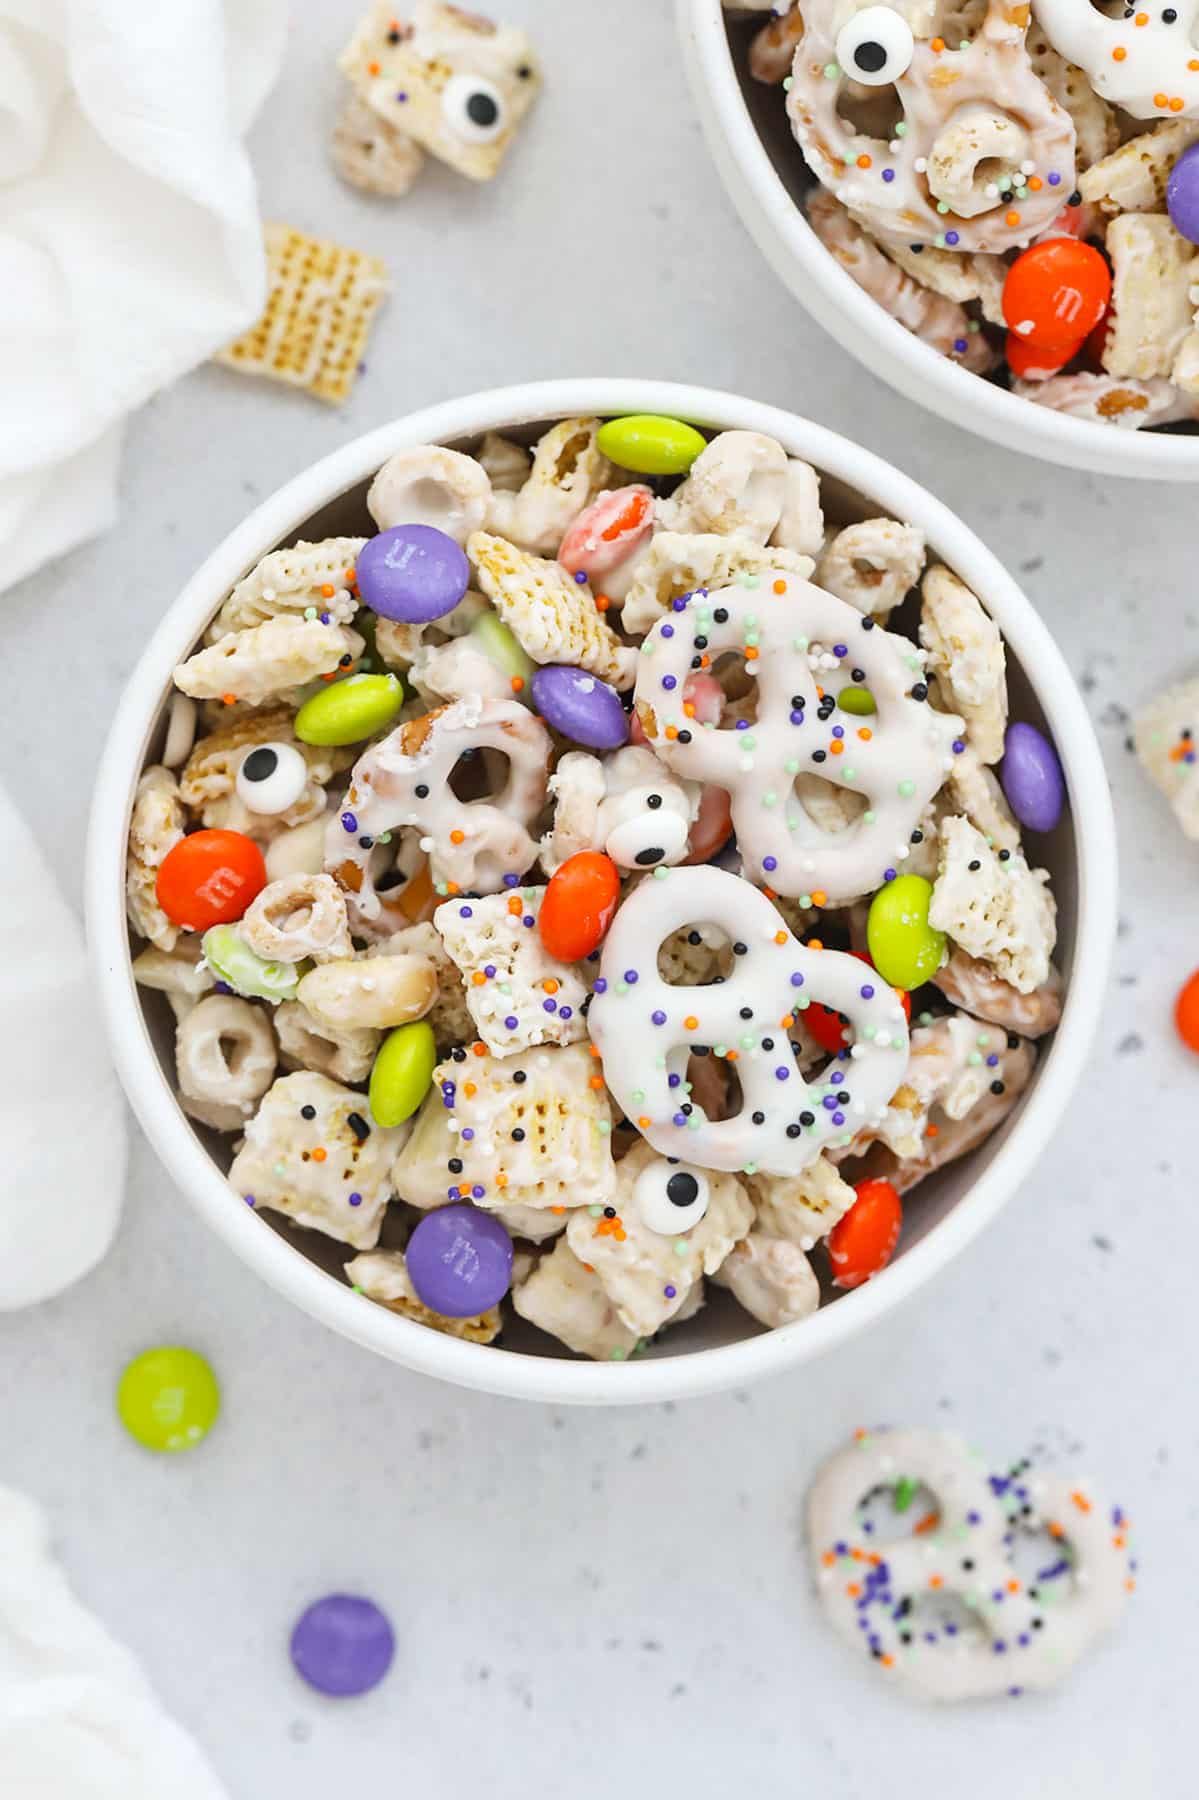 Bowls of gluten-free Halloween Chex Mix with m&ms and pretzels